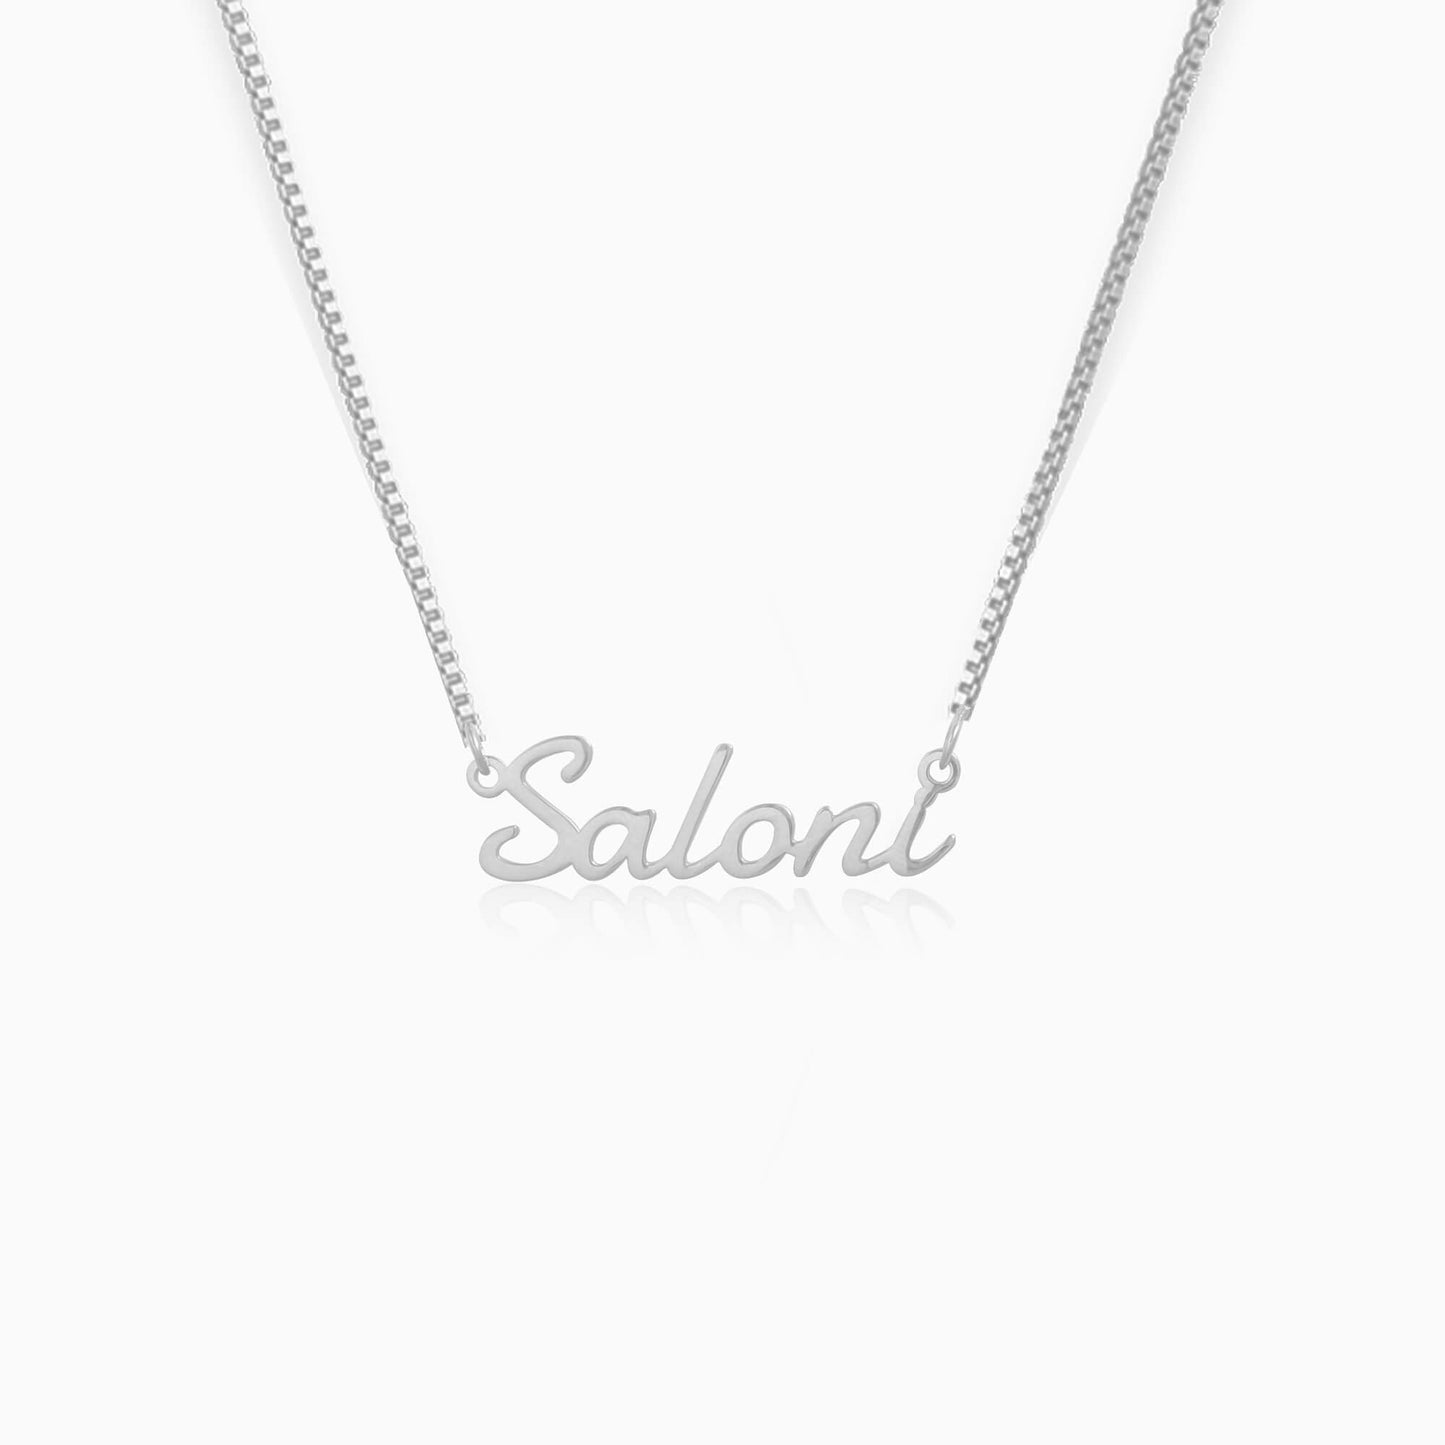 Personalised pure silver name necklace